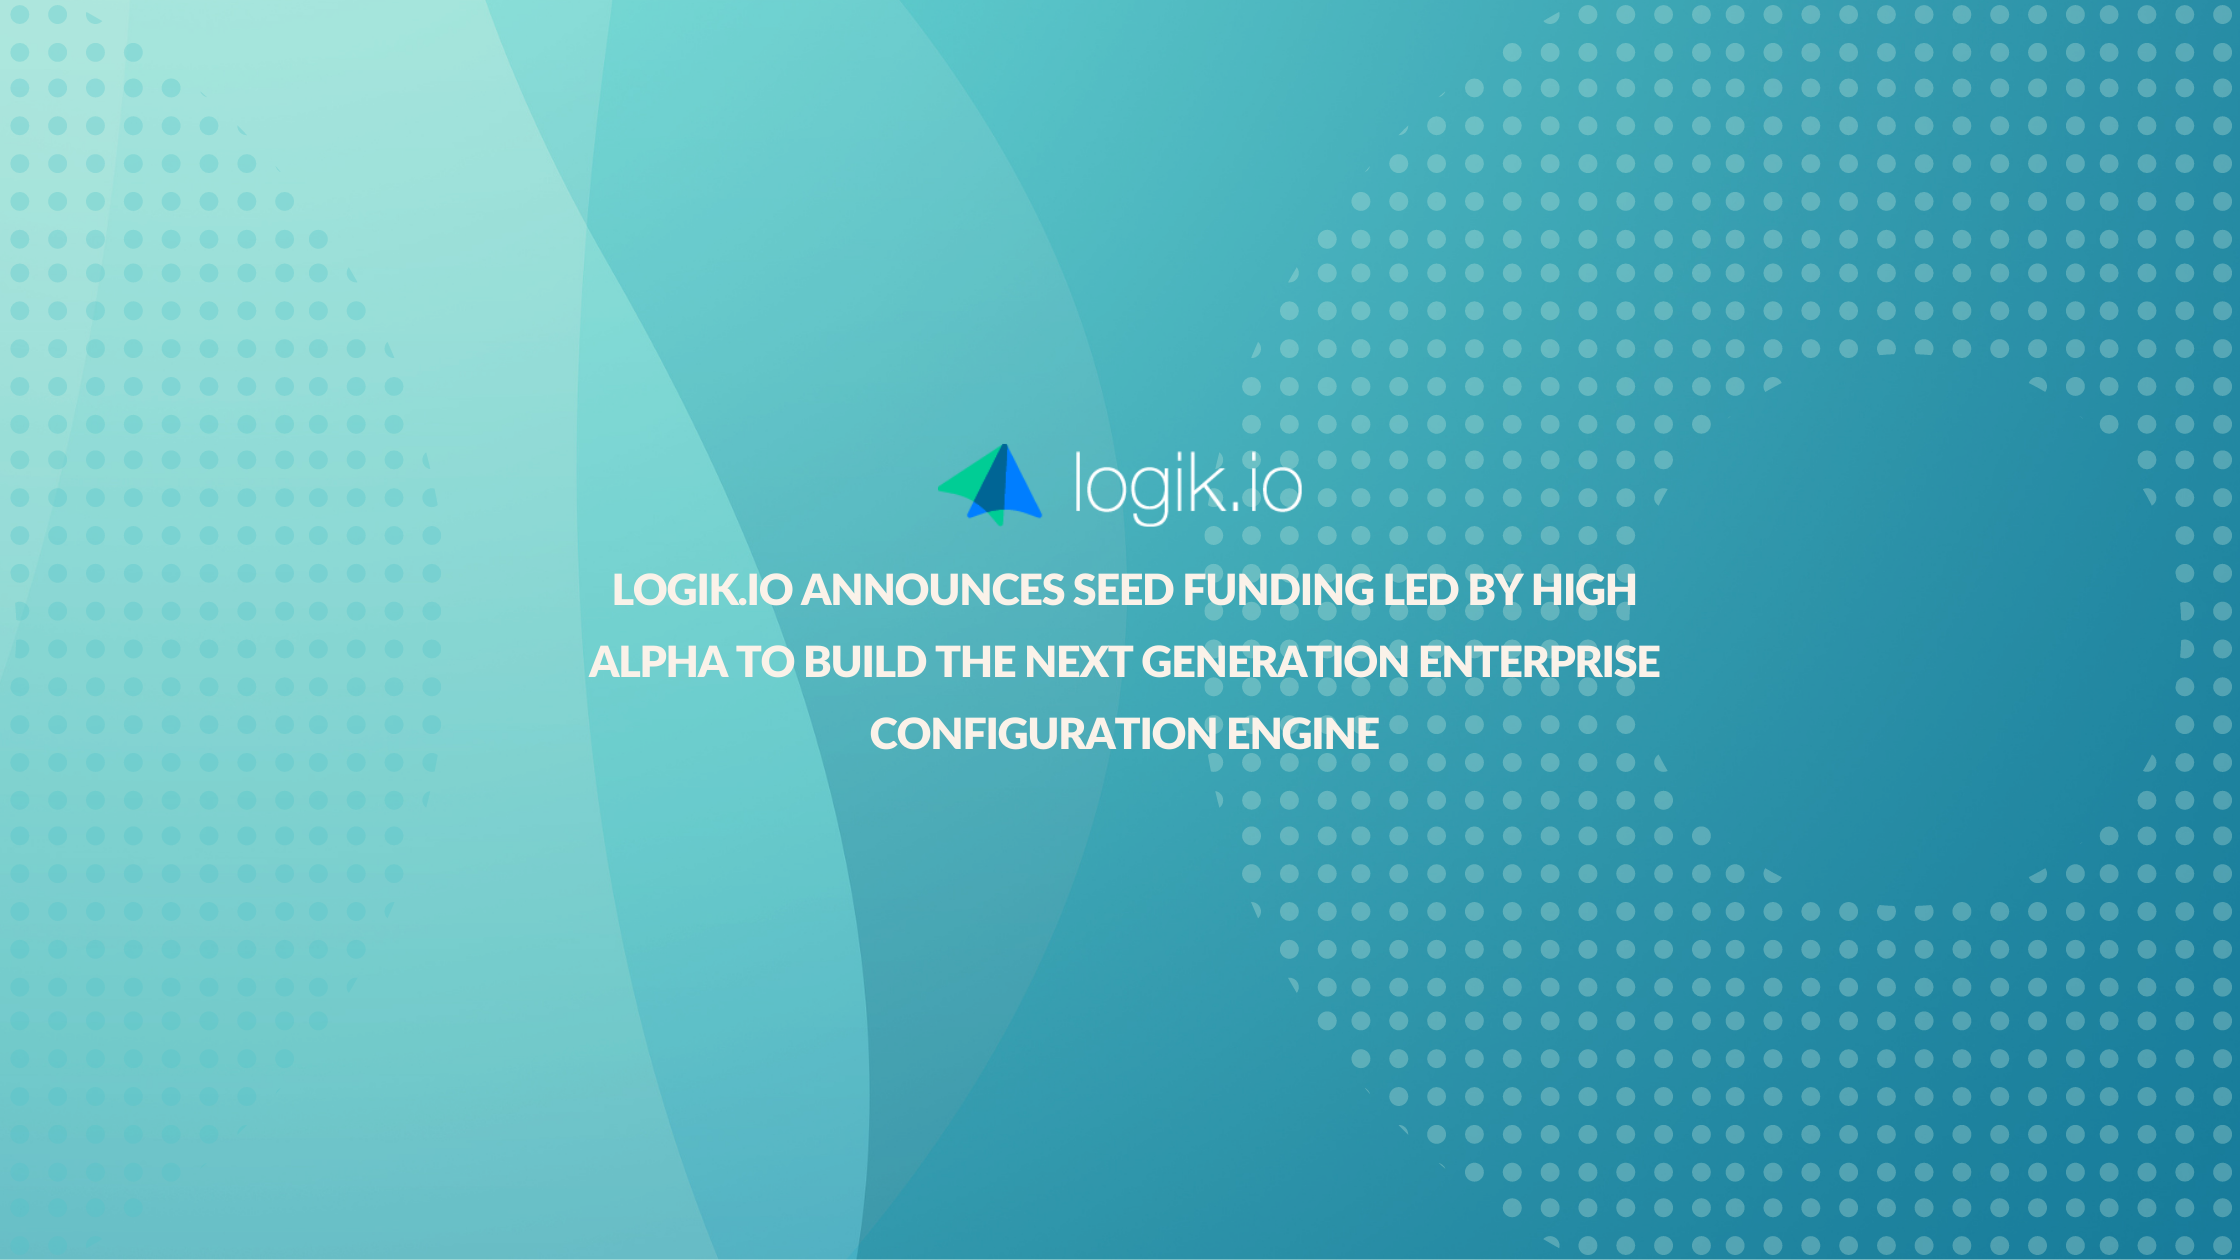 Logik.io Announces Seed Funding Led by High Alpha to Build the Next Generation Enterprise Configuration Engine